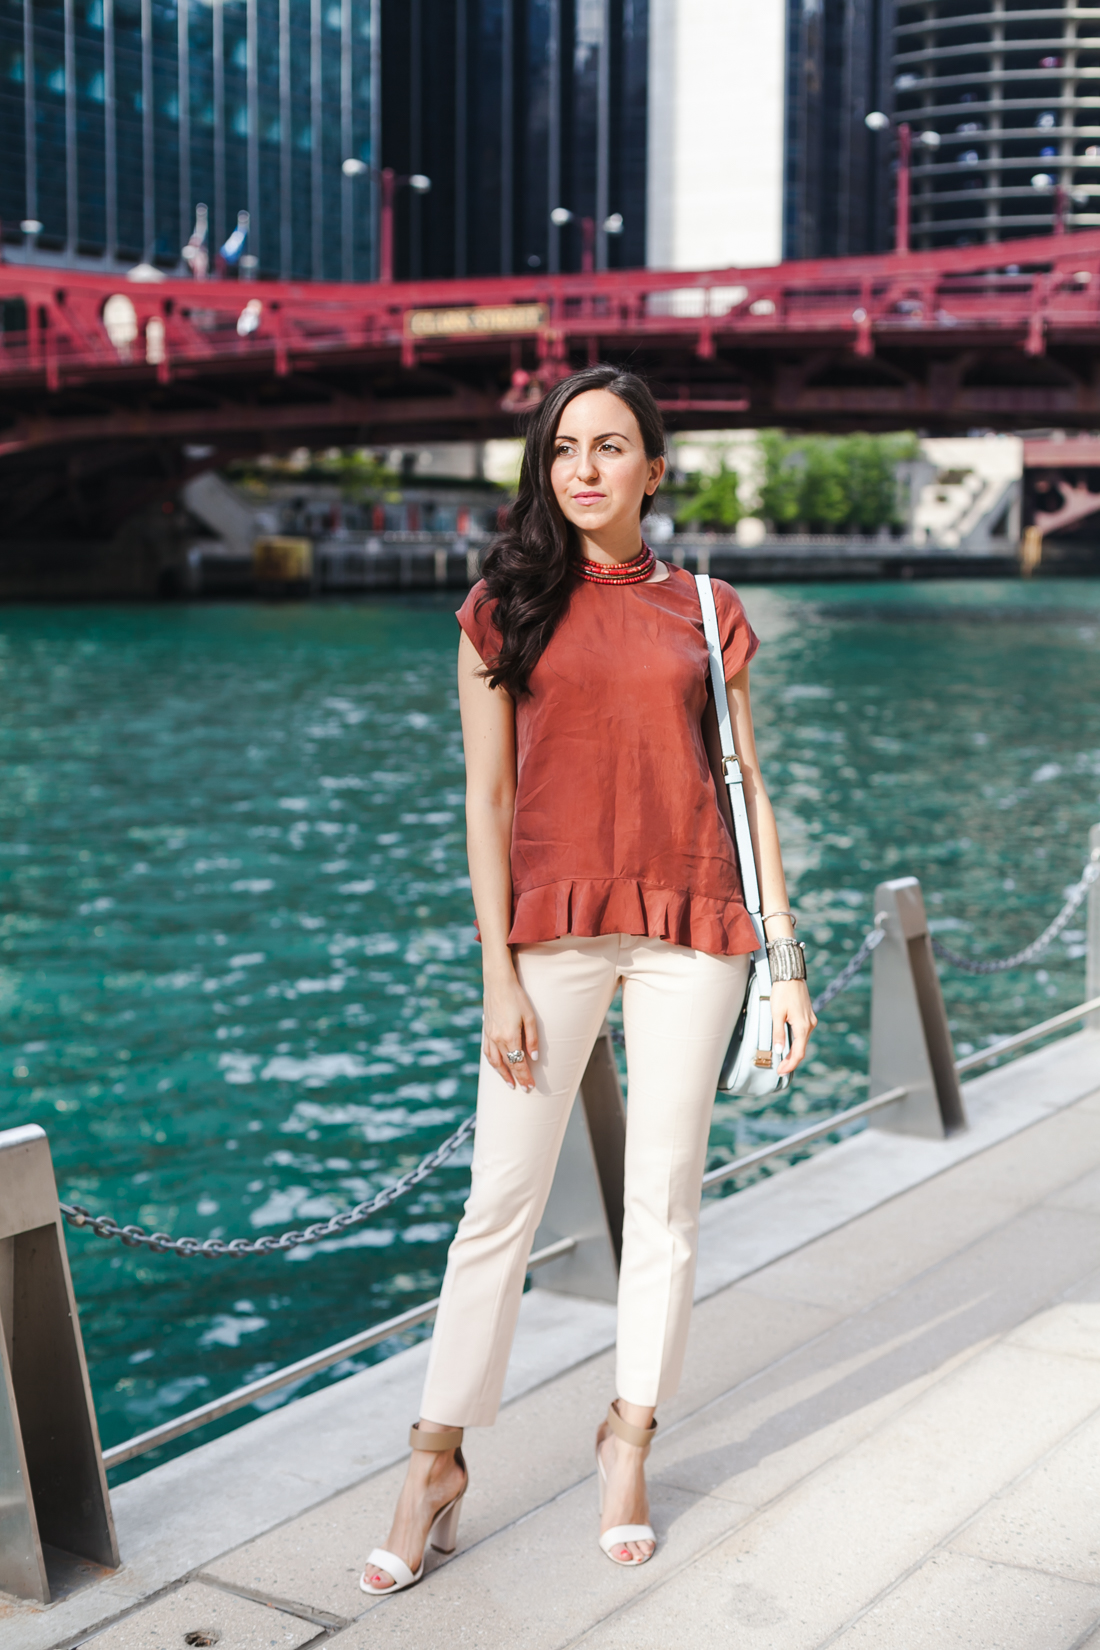 Nomad Luxuries Yana Puaca wearing a rust ruffled top and pink pants in chicago summer